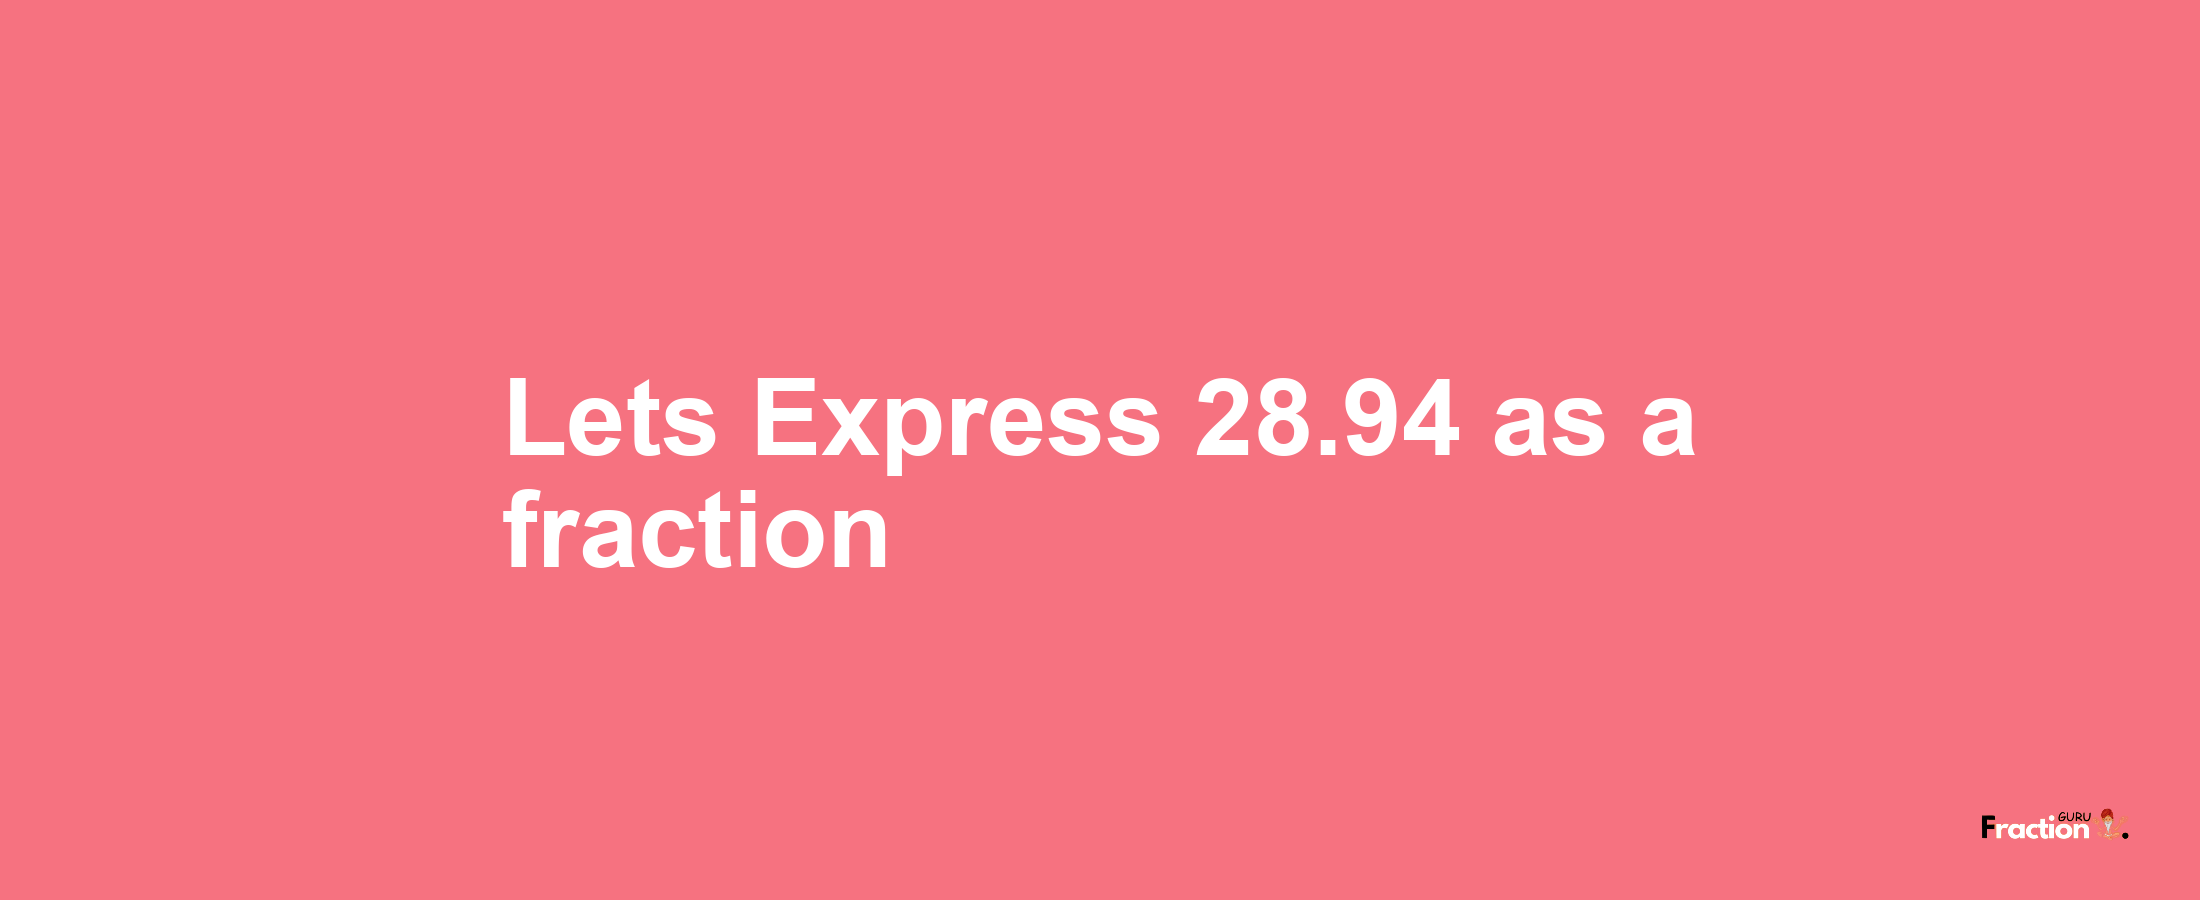 Lets Express 28.94 as afraction